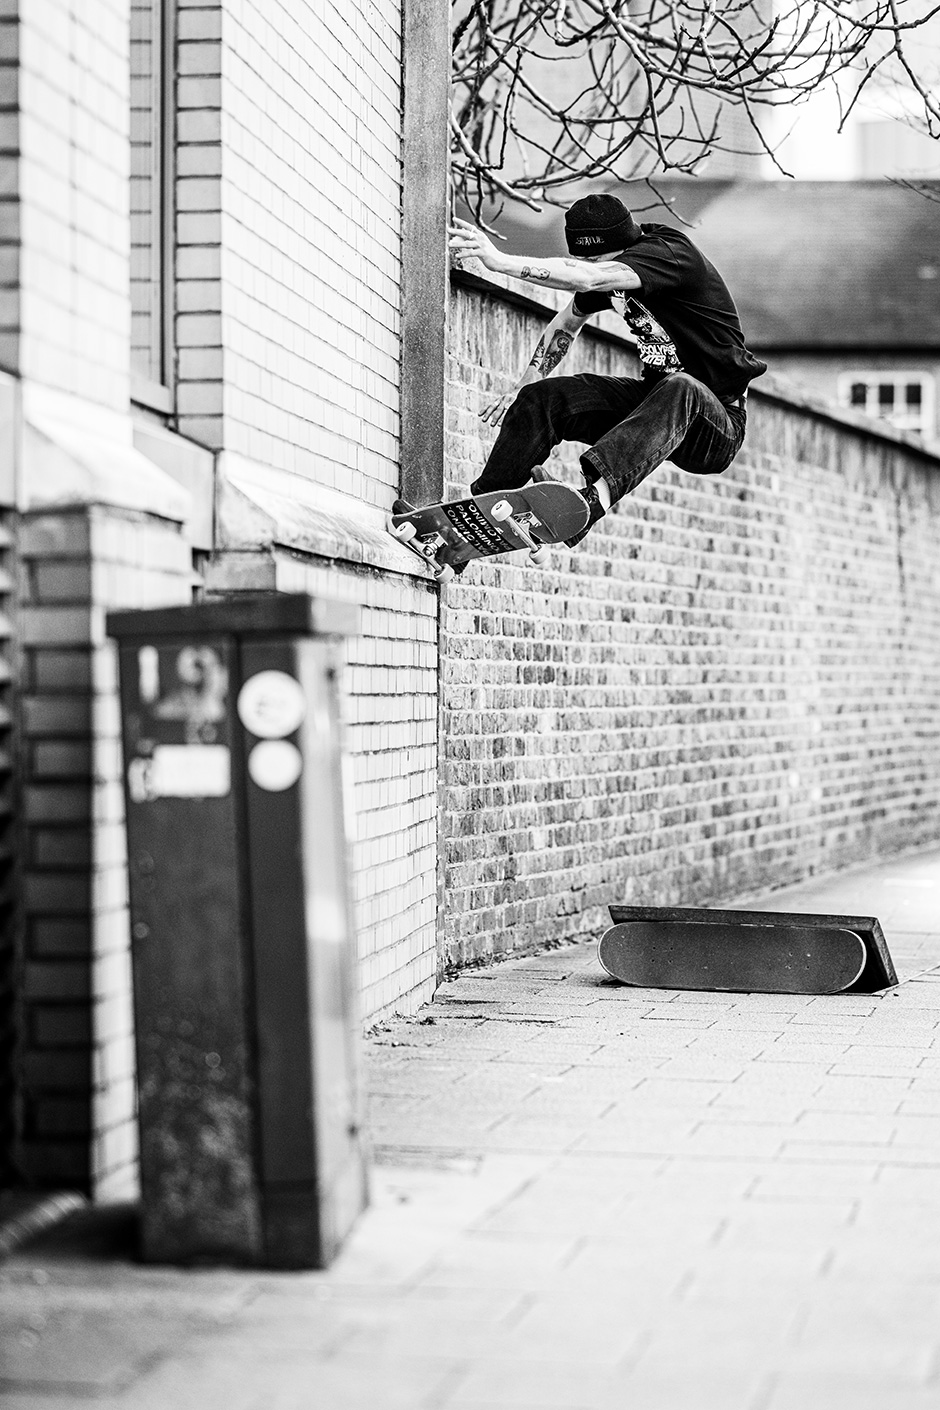 Mikey Patrick props a drain and hits the wall for Rich West's lens